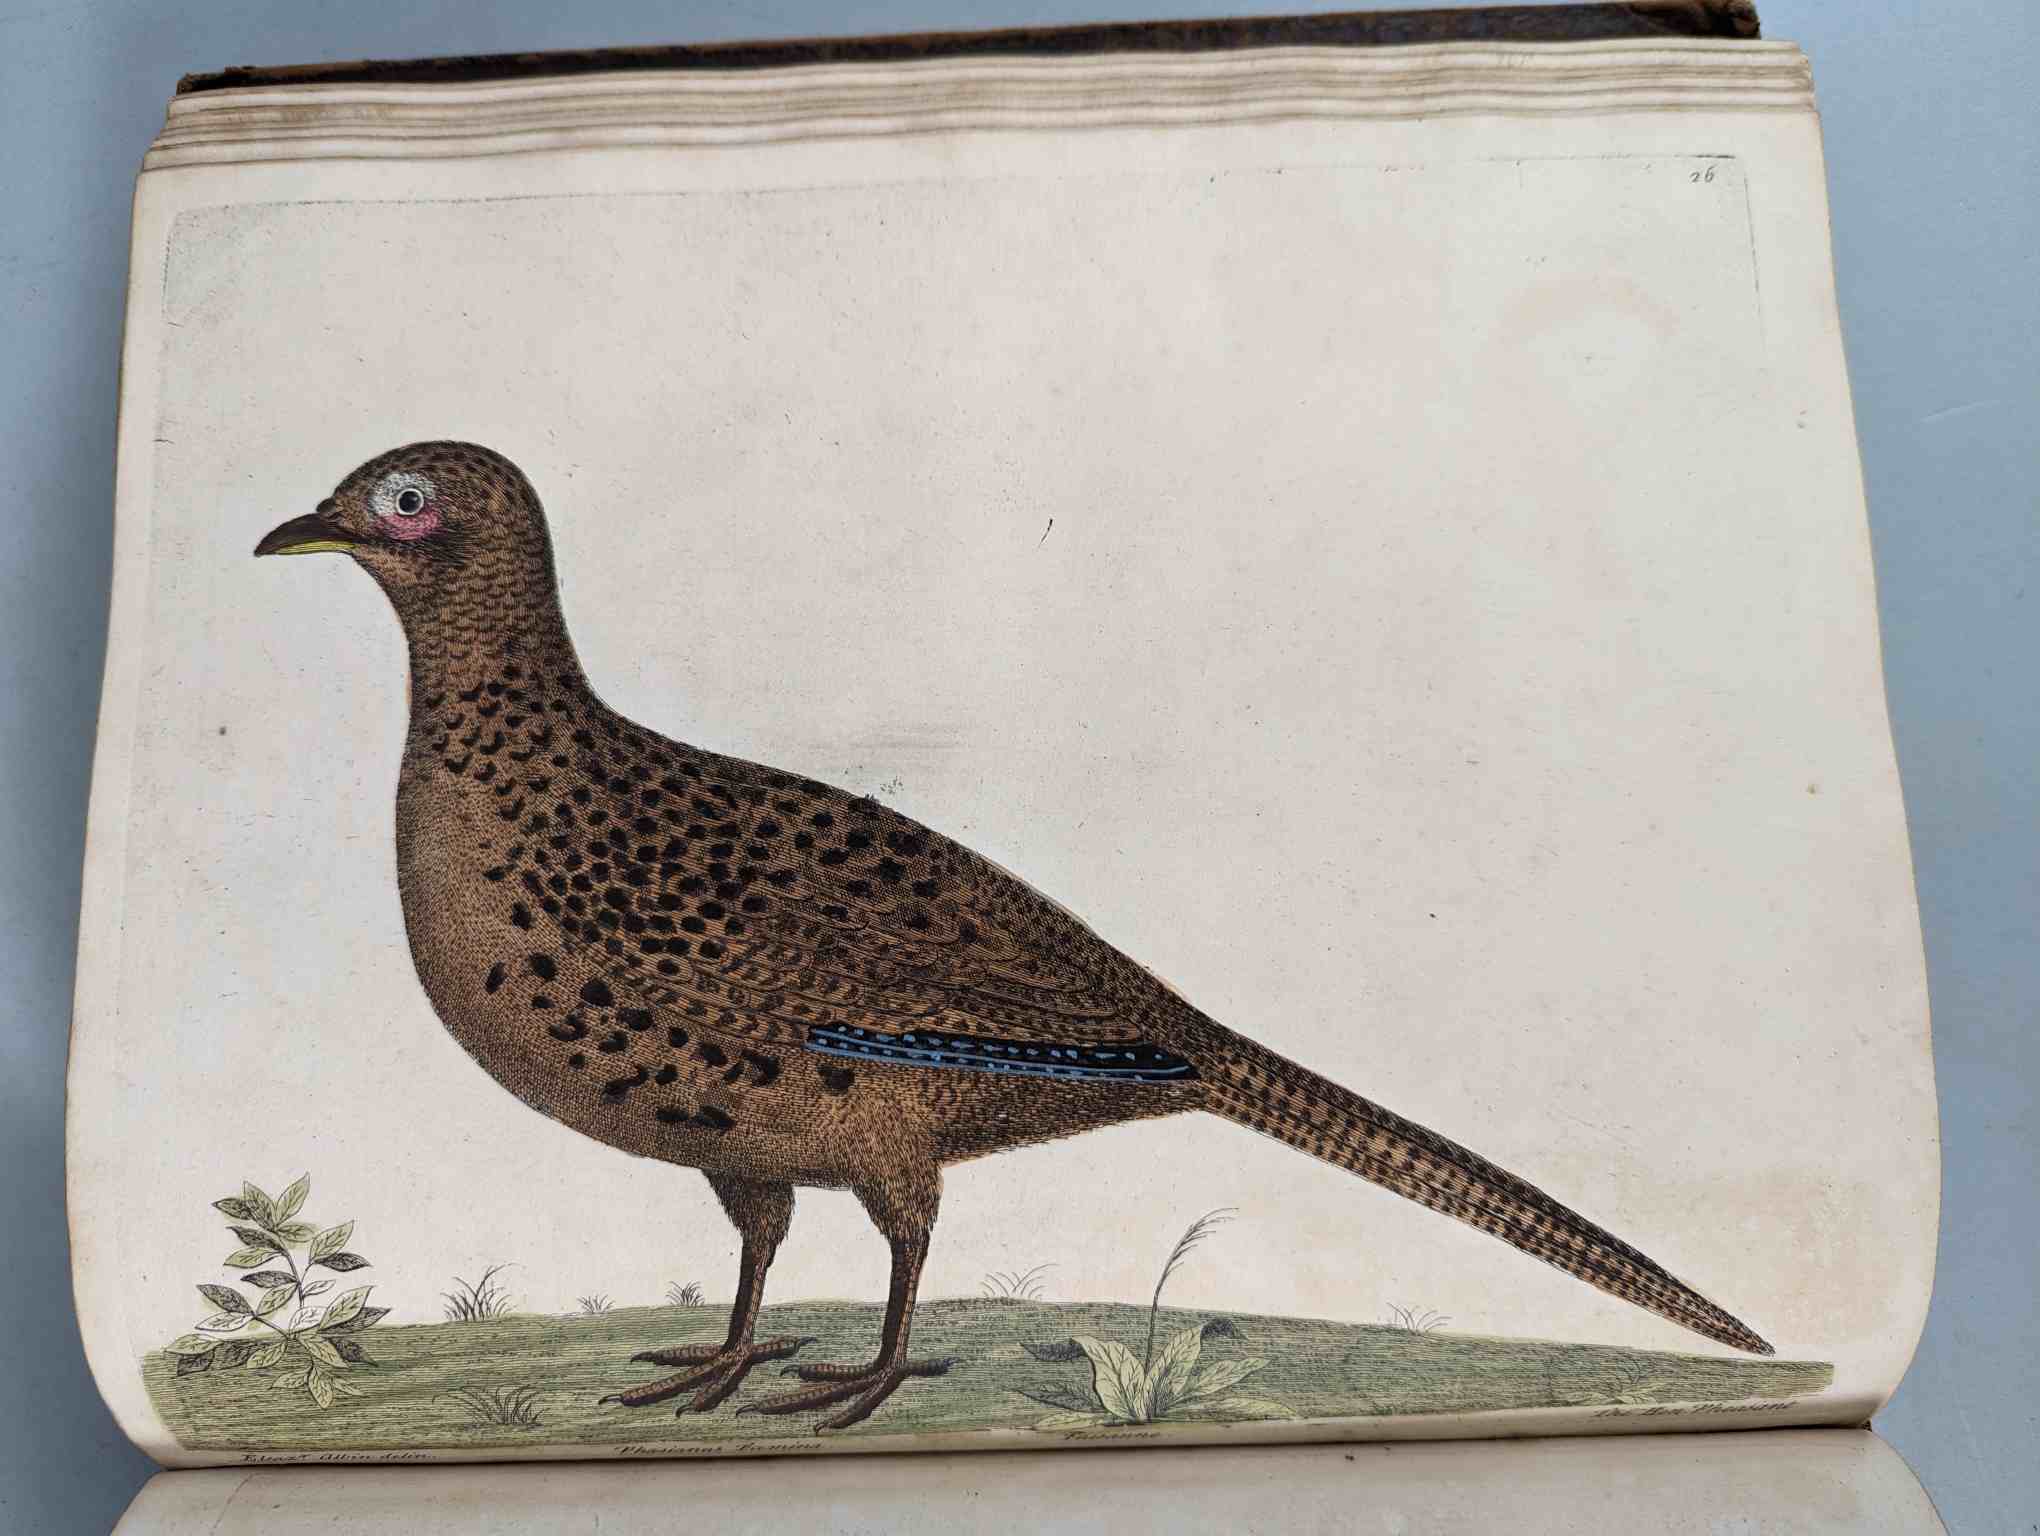 ALBIN, Eleazar. A Natural History of Birds, to which are added, Notes and Observations by W. - Image 29 of 208